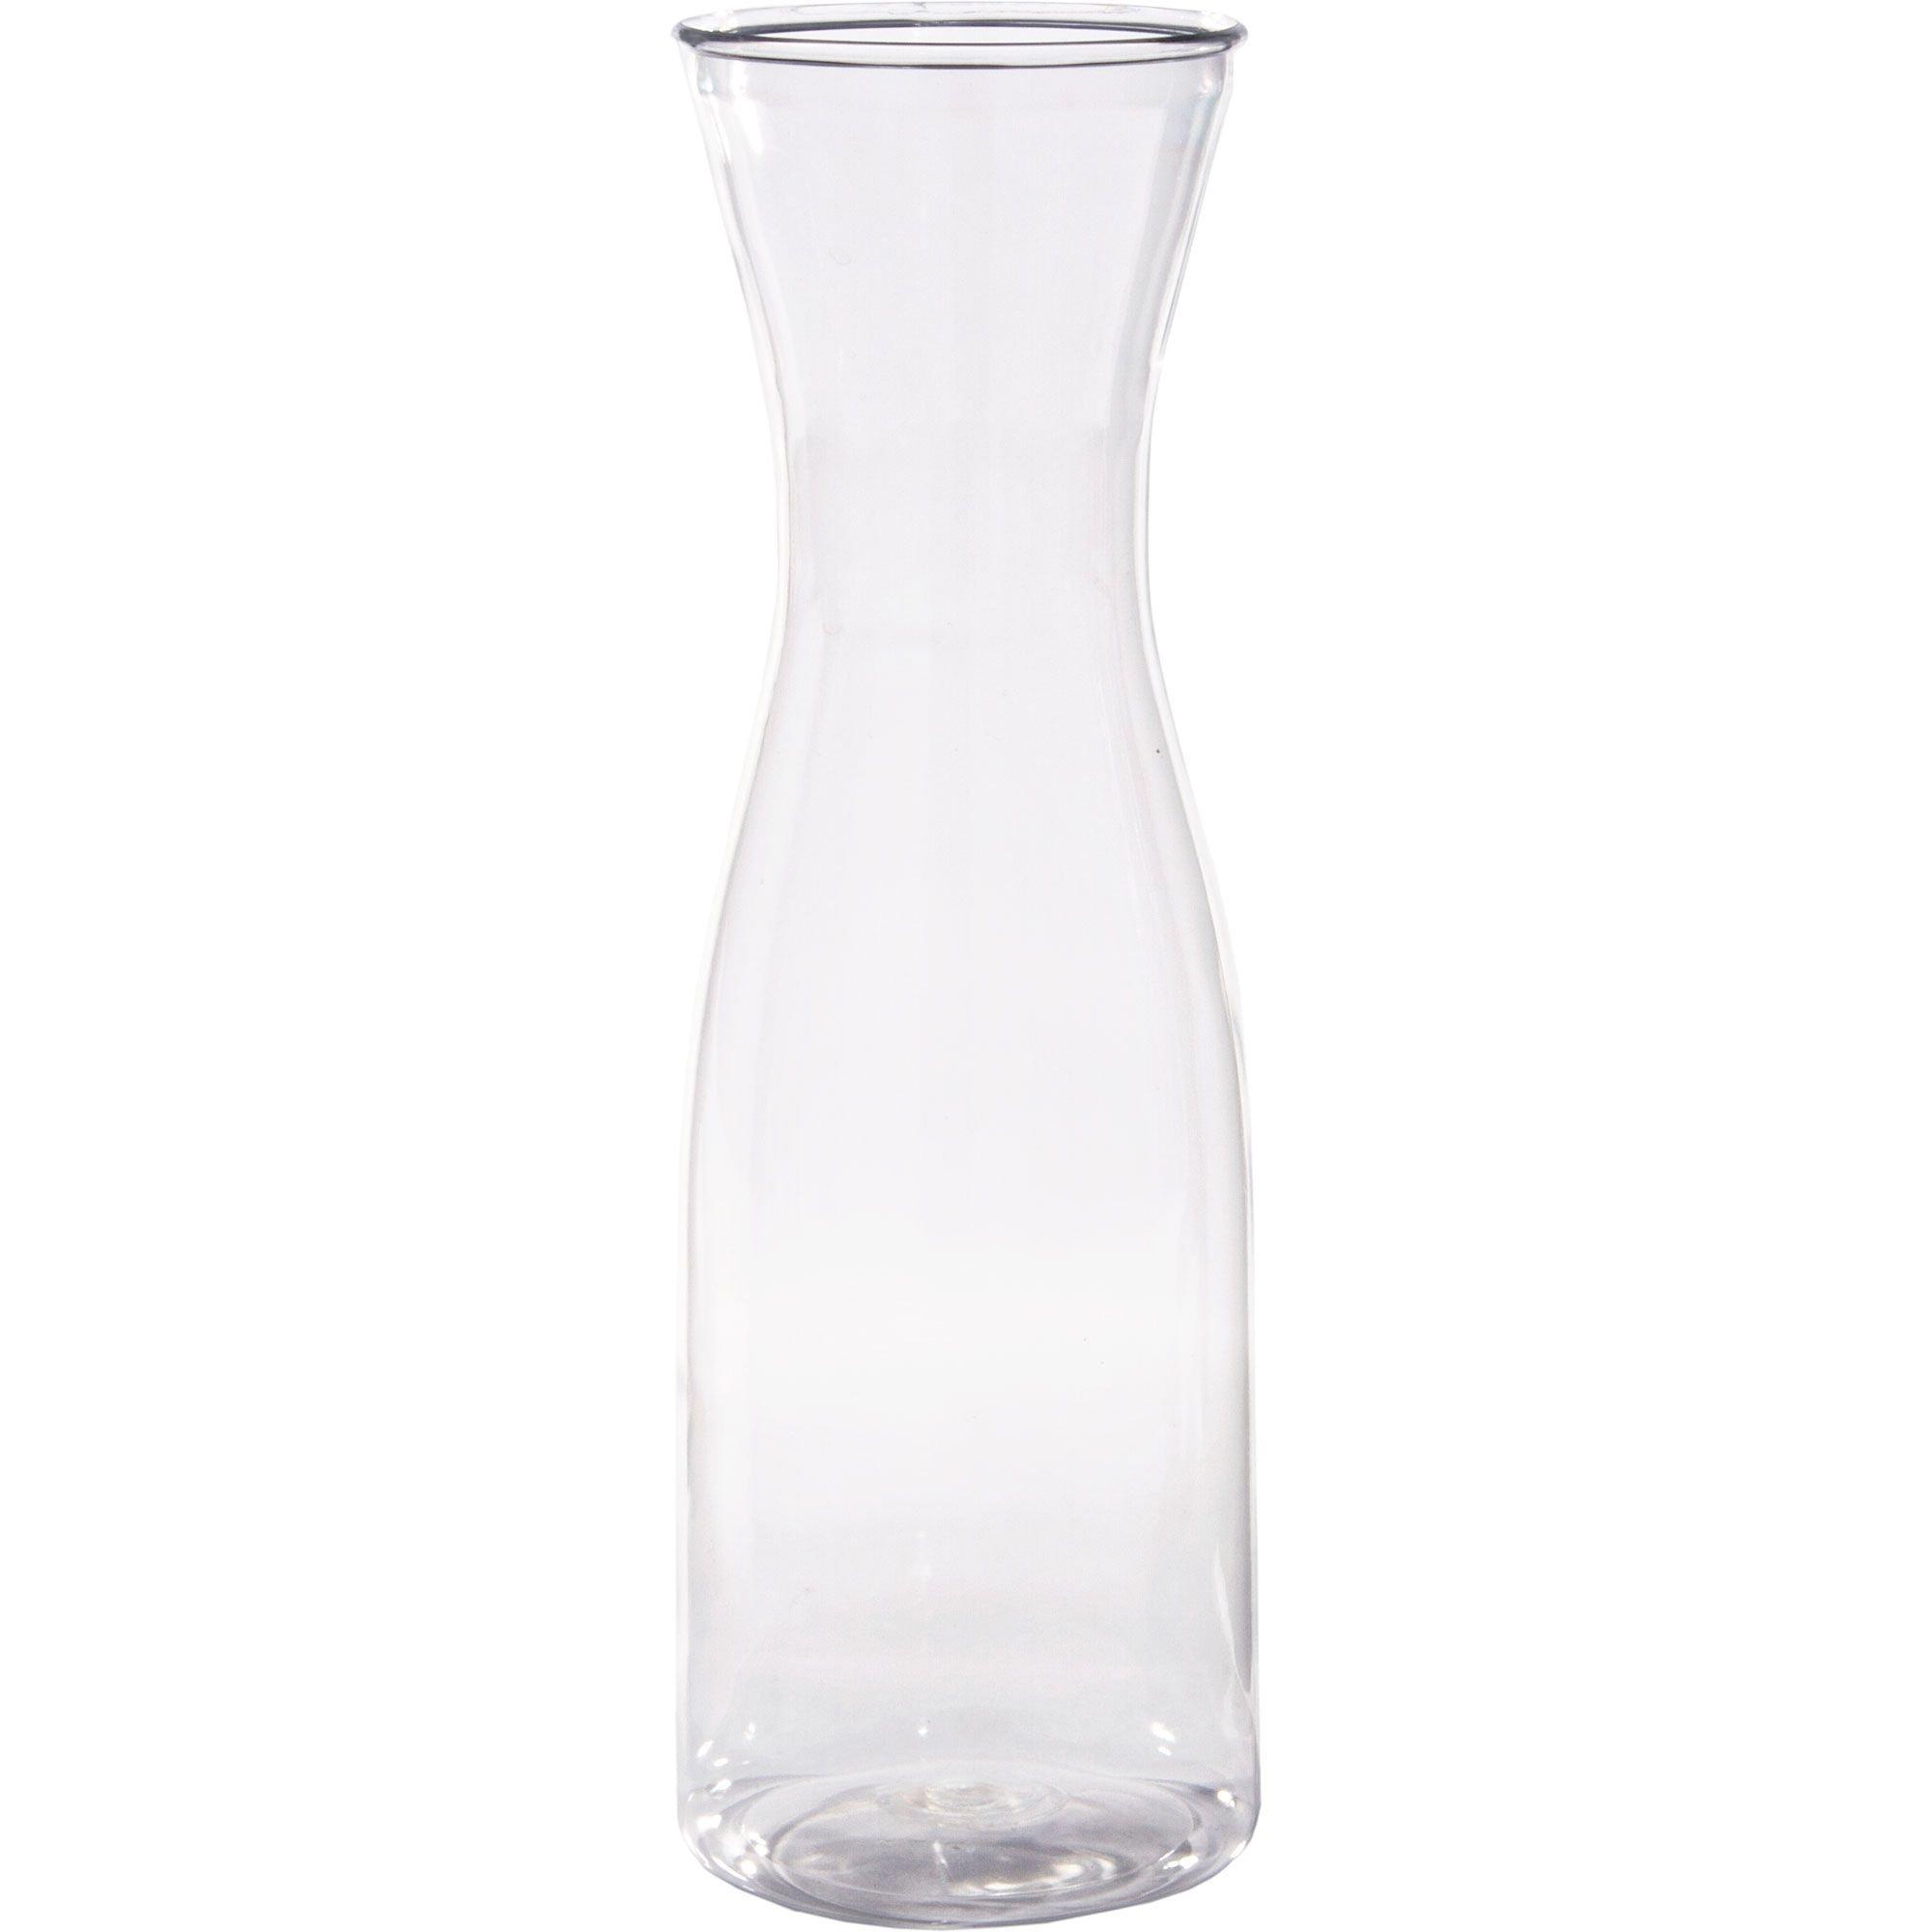 12 Carafes, 35 oz. Clear Large Plastic Wine Carafes with Lid